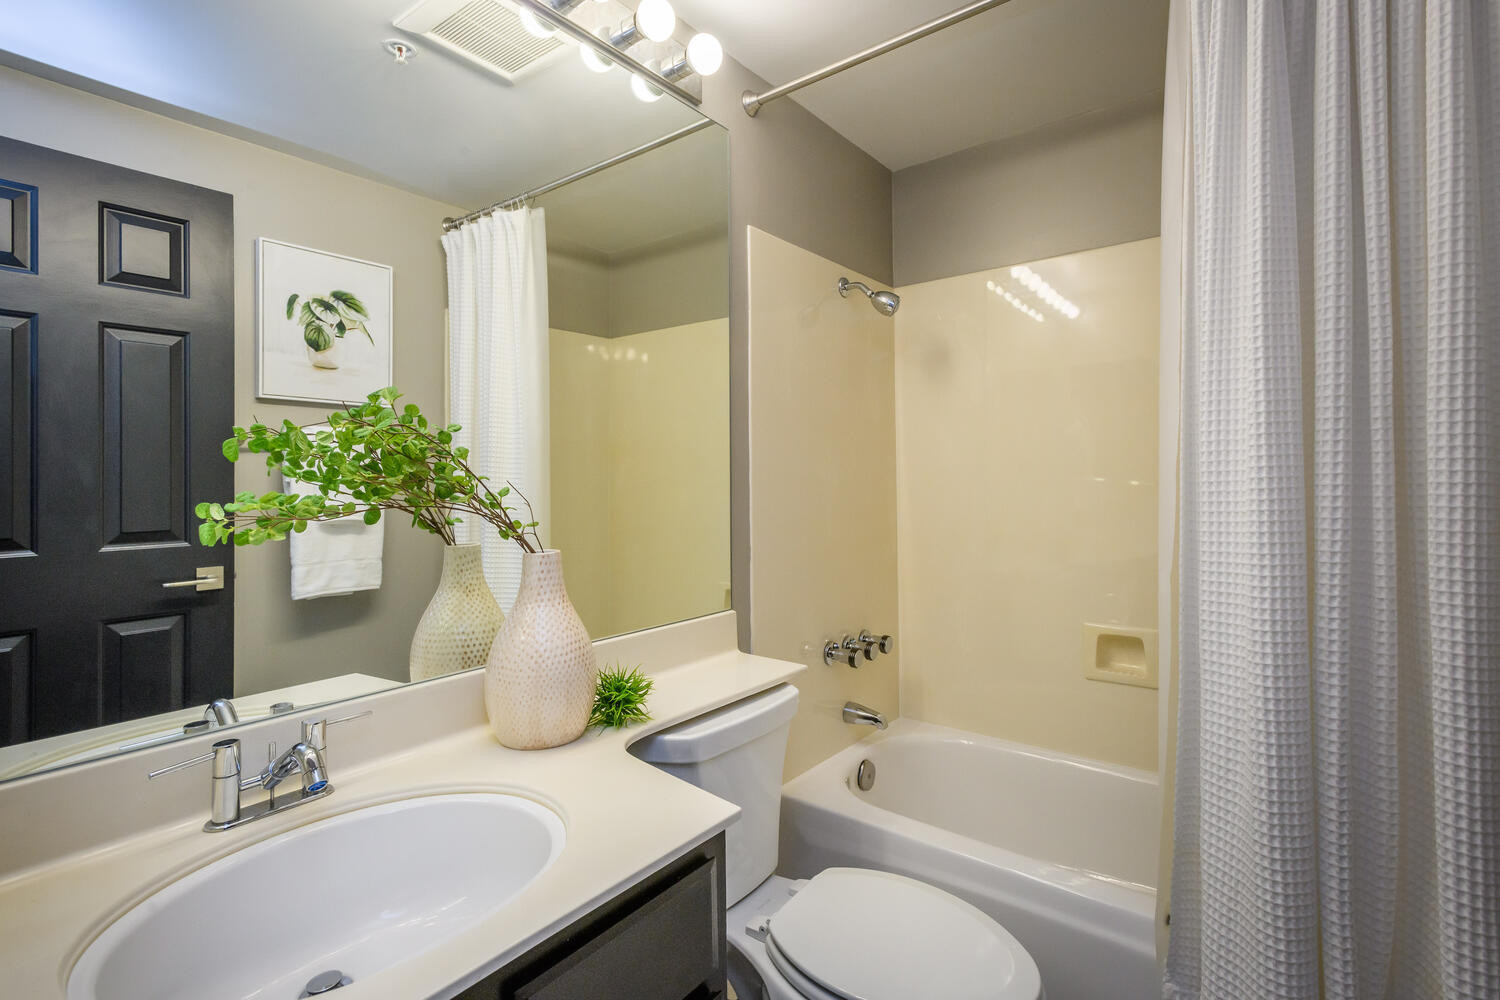 Bathroom vanity in Lighthouse Cove area in Redwood Shores.